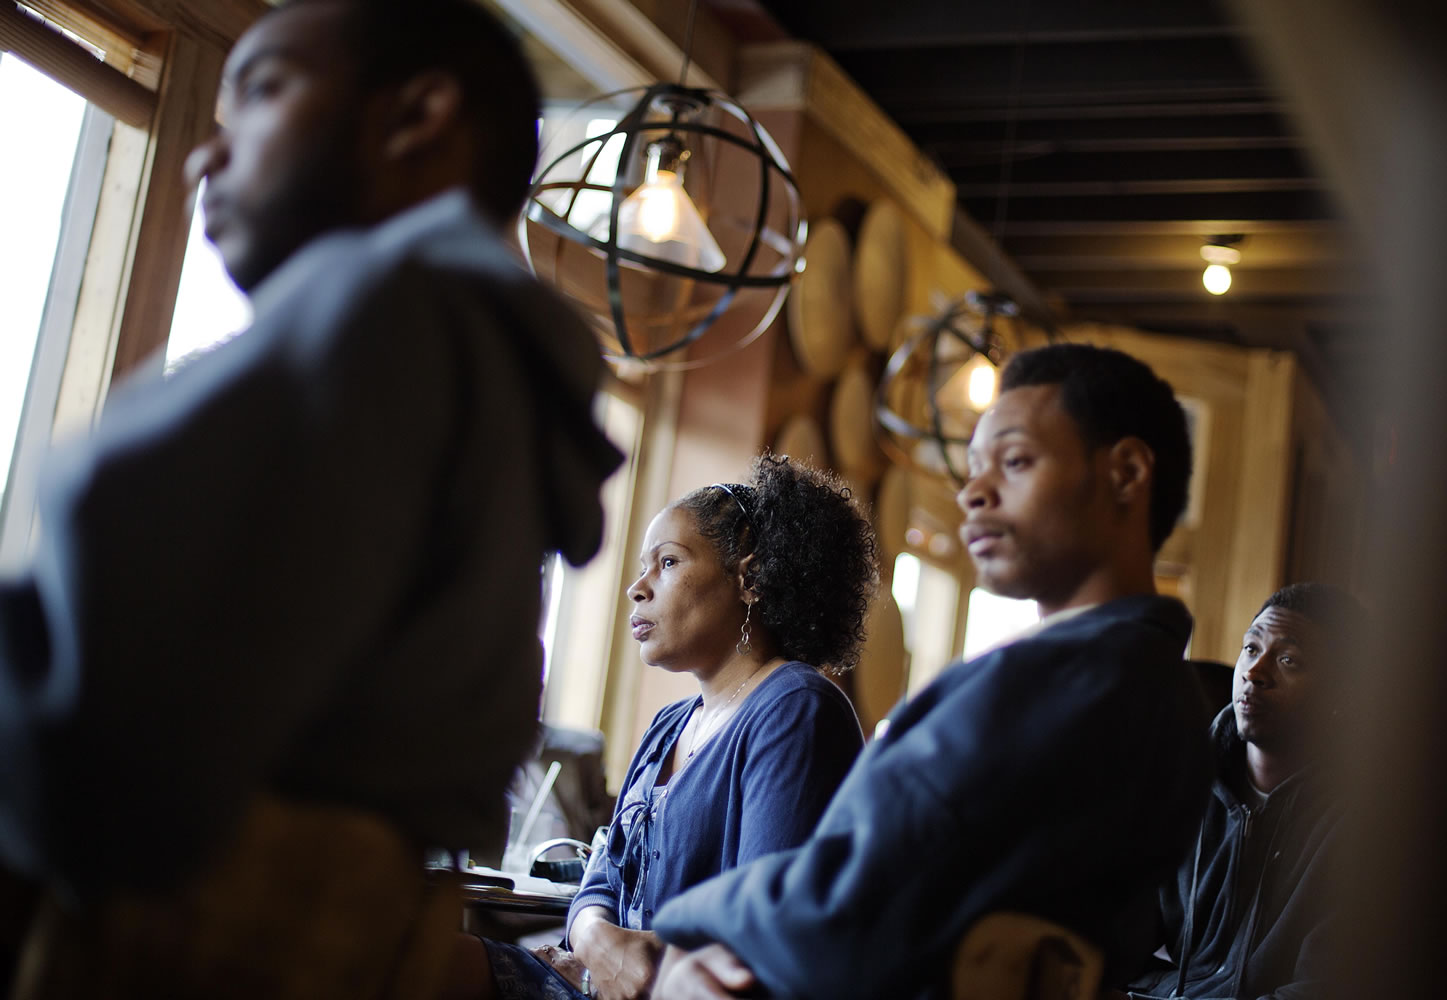 Lisa Marie Hyman-Walker, center, and son Eugene Mosby, right, listen to Leo Smith, minority engagement director for the Georgia Republican Party, speaking at the Delightful Eatz Bar and Grill in the historically African American neighborhood of Edgewood in Atlanta.